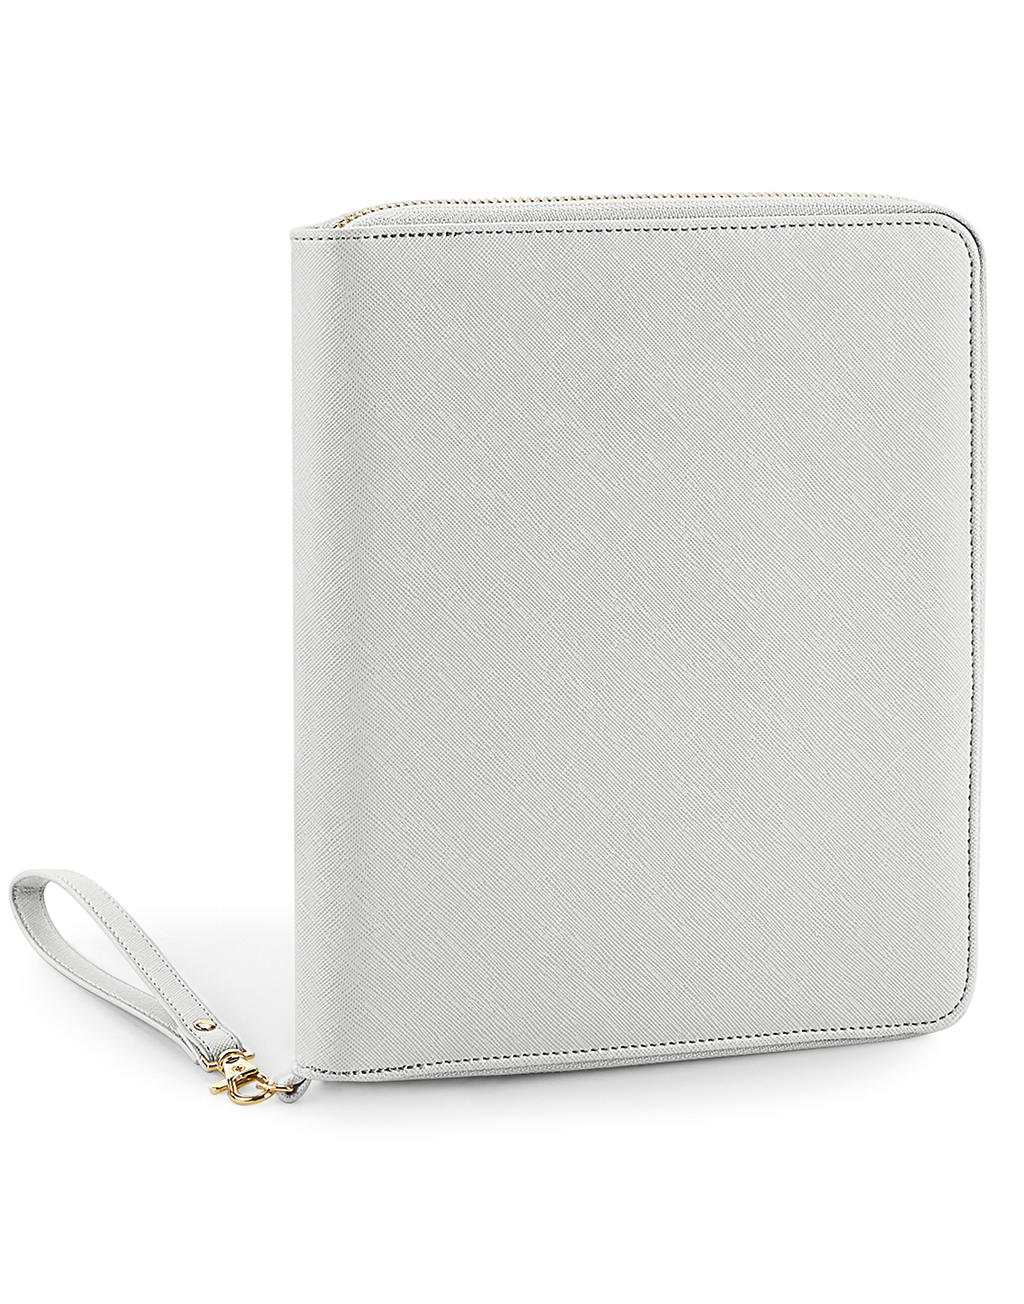  Boutique Travel/ Tech Organiser in Farbe Soft Grey